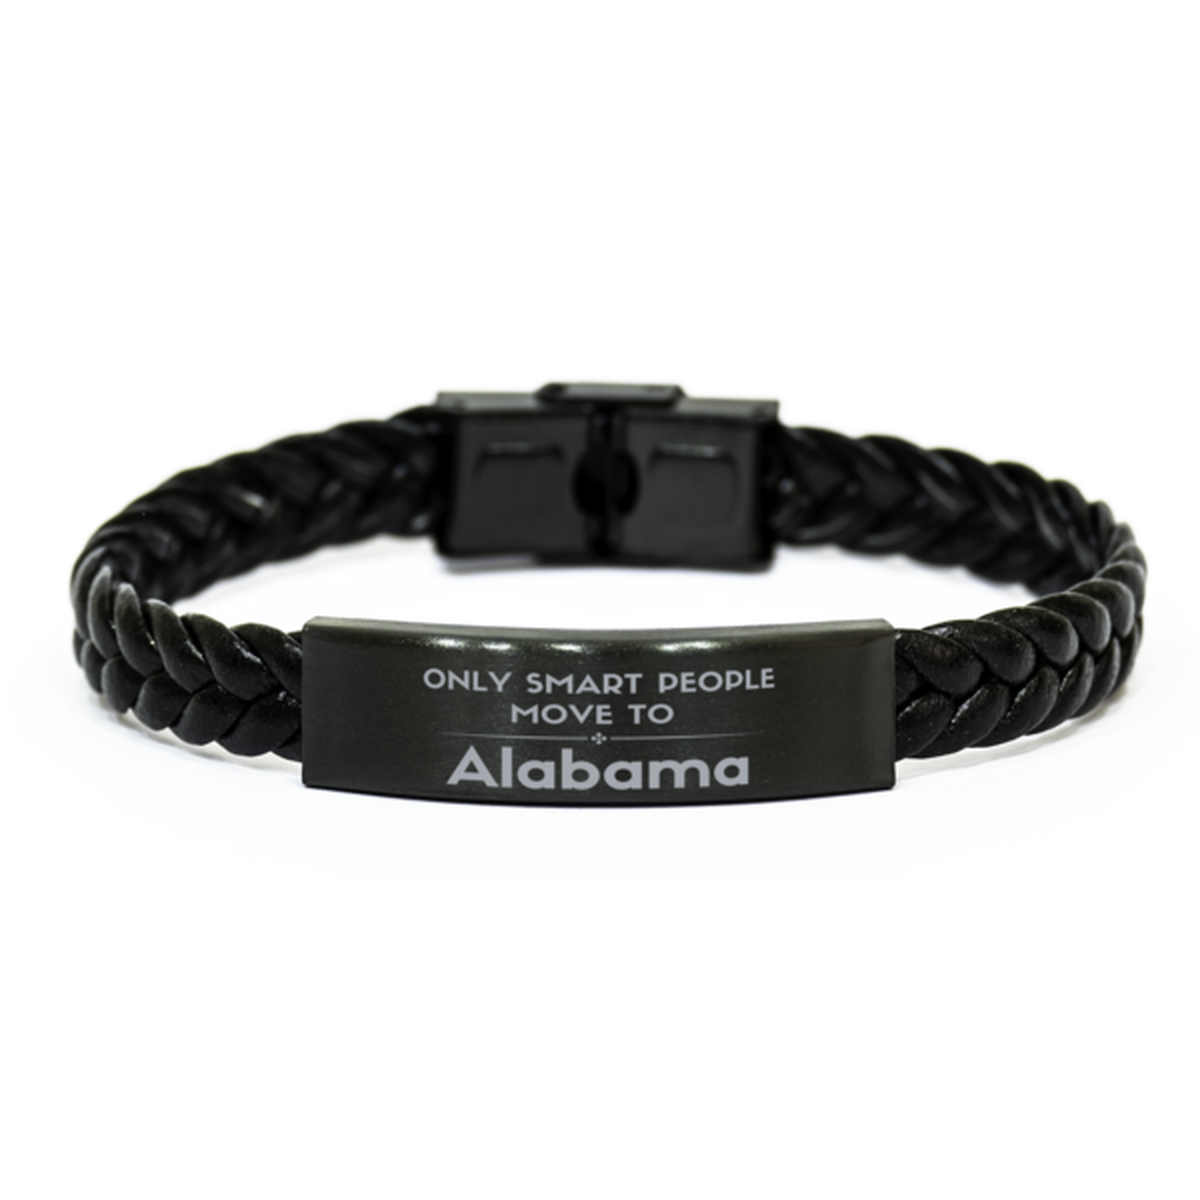 Only smart people move to Alabama Braided Leather Bracelet, Gag Gifts For Alabama, Move to Alabama Gifts for Friends Coworker Funny Saying Quote